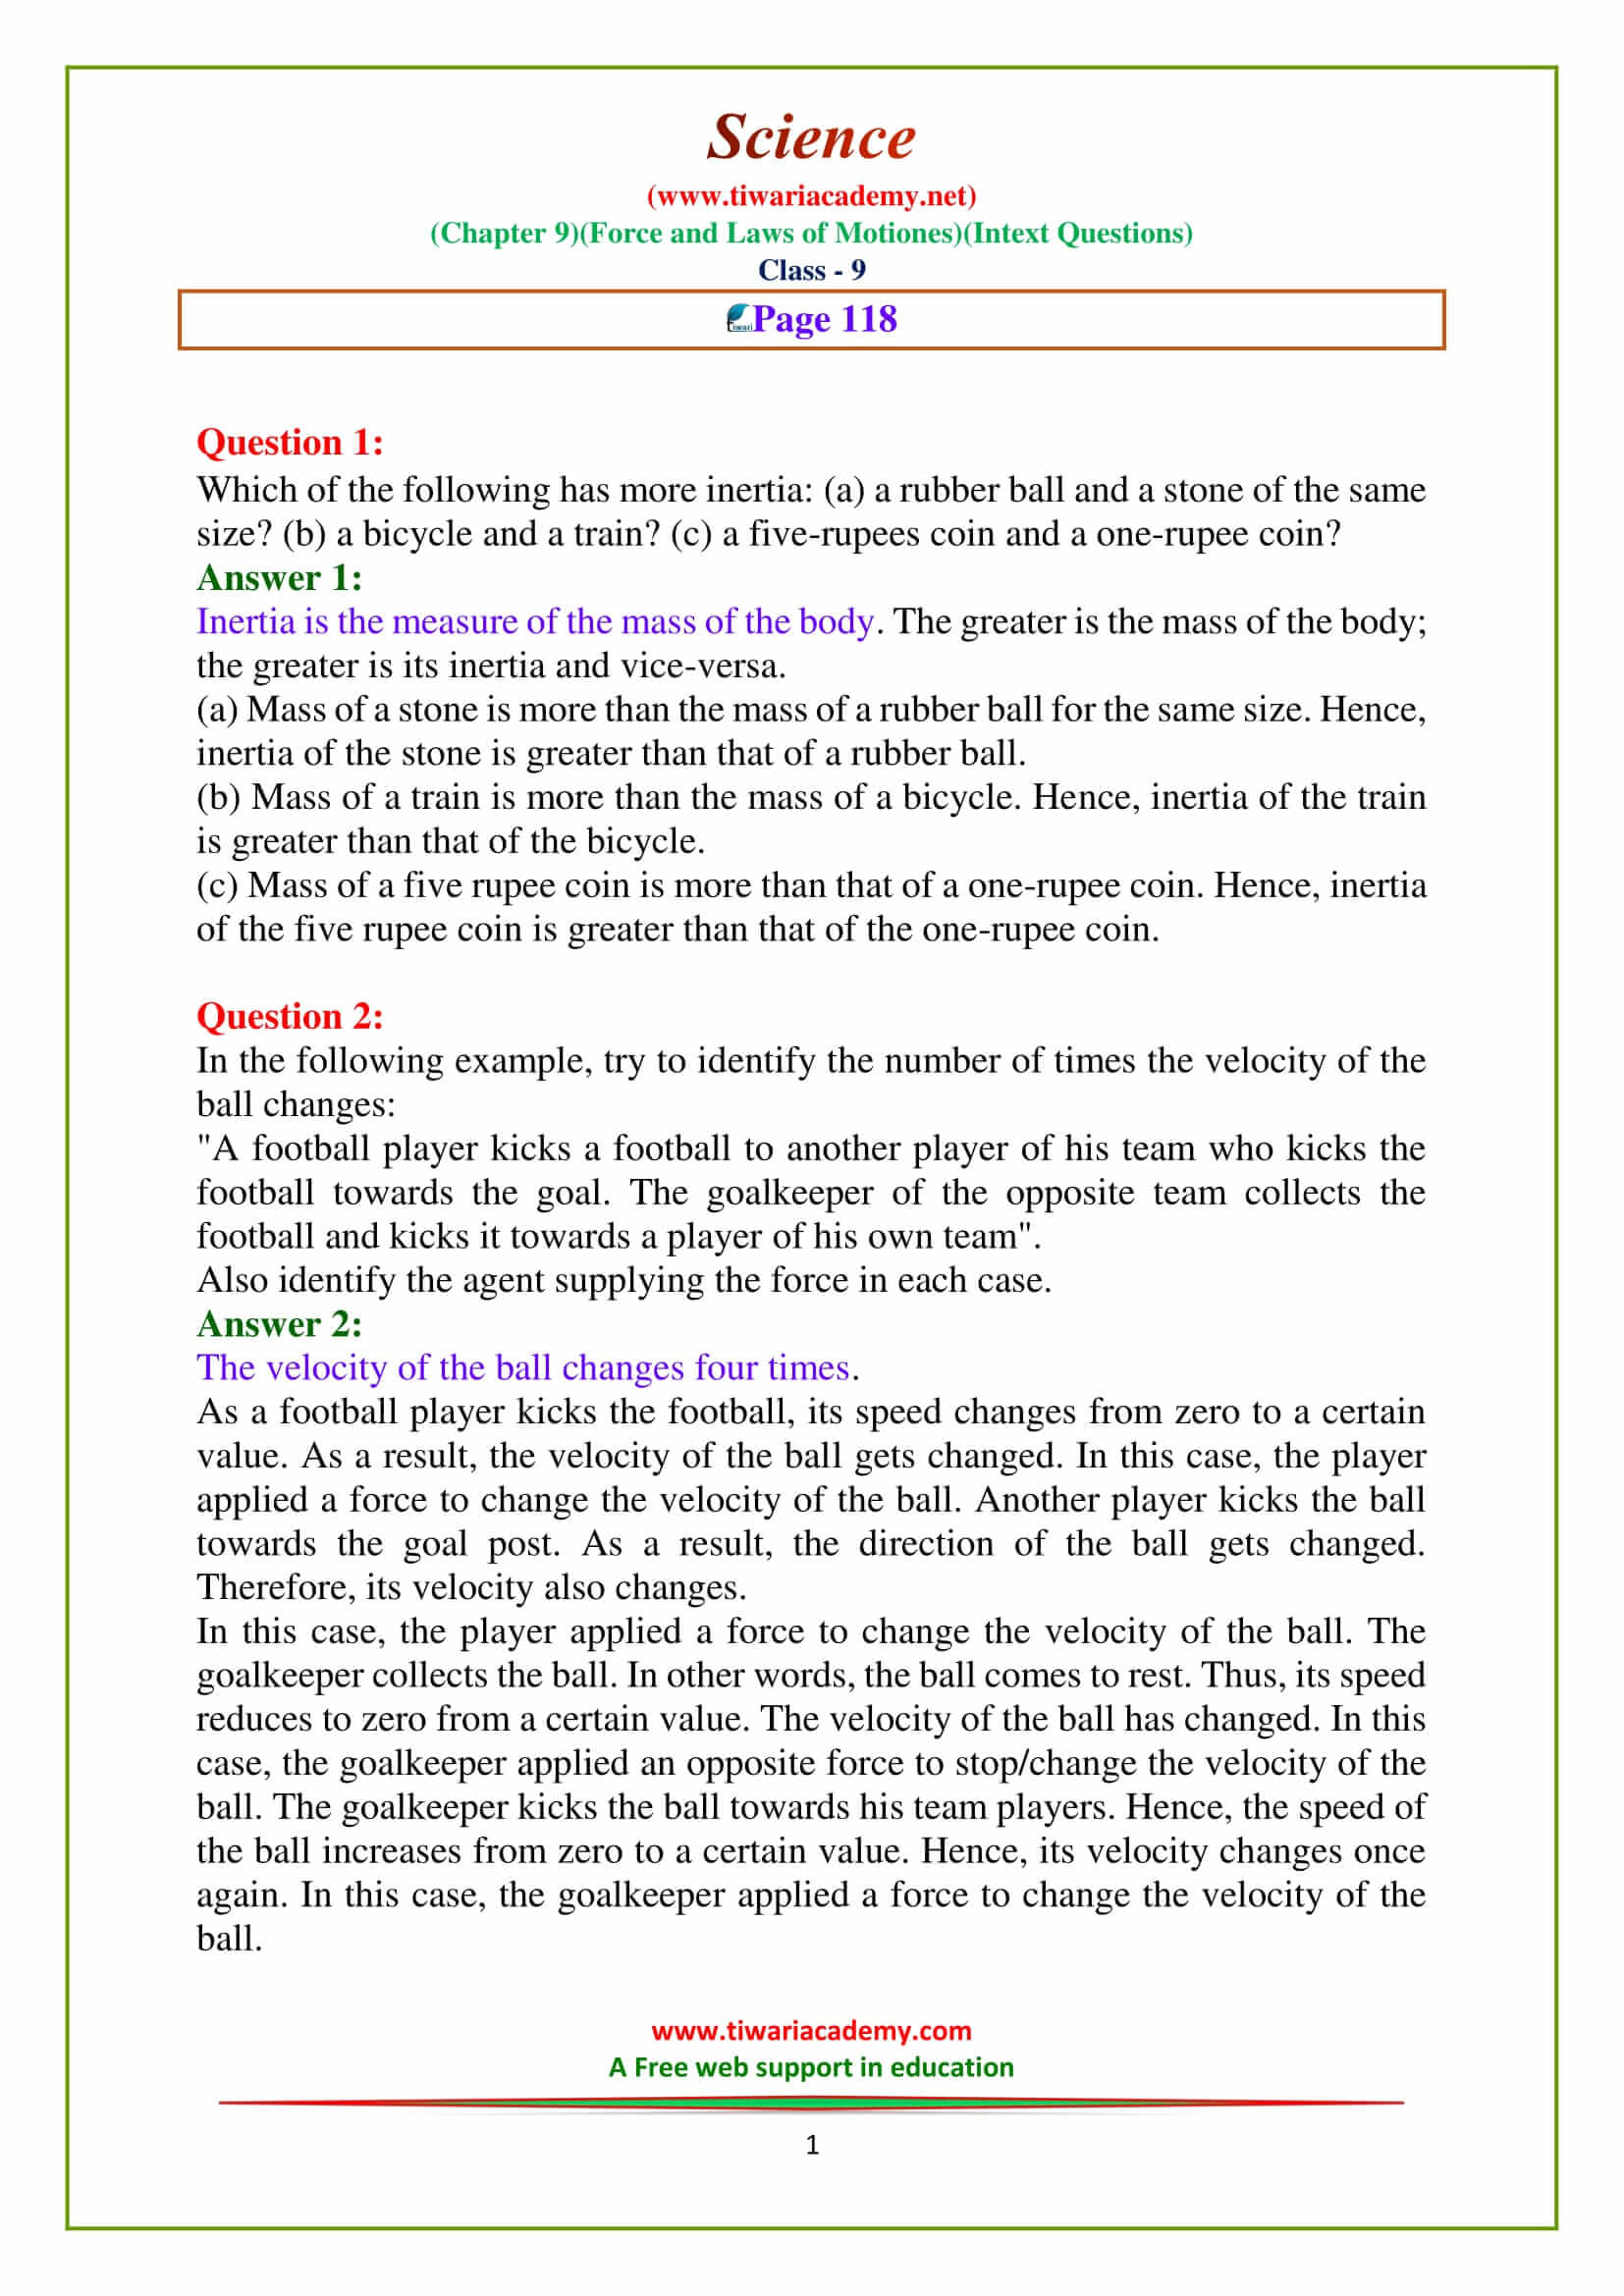 NCERT Solutions for Class 9 Science Chapter 9 force and laws of motion Intext questions on page 118